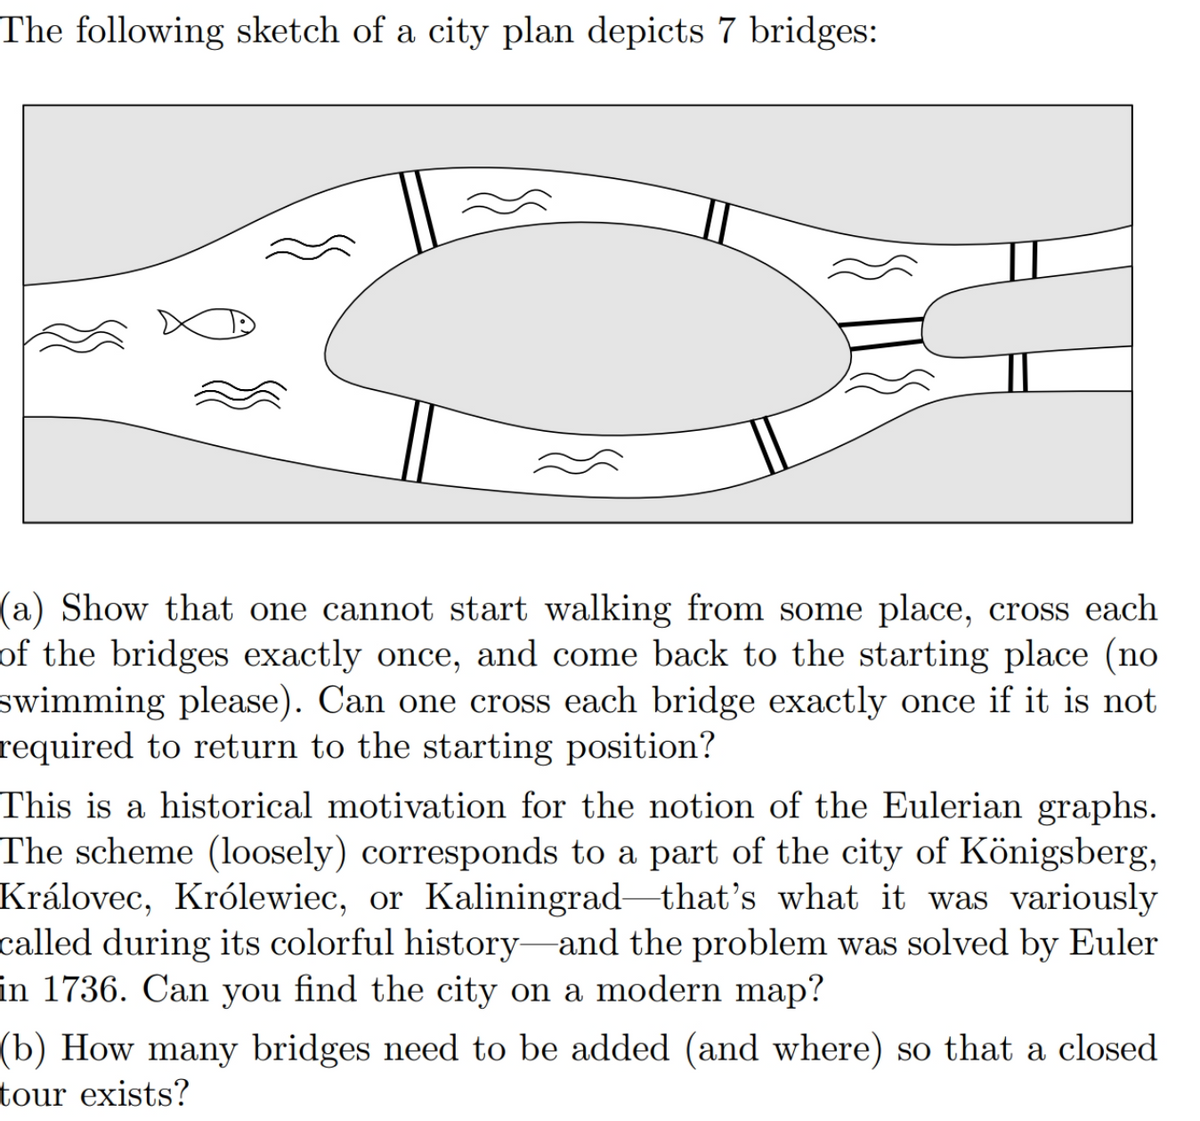 The following sketch of a city plan depicts 7 bridges:
(a) Show that one cannot start walking from some place, cross each
of the bridges exactly once, and come back to the starting place (no
swimming please). Can one cross each bridge exactly once if it is not
required to return to the starting position?
This is a historical motivation for the notion of the Eulerian graphs.
The scheme (loosely) corresponds to a part of the city of Königsberg,
Královec, Królewiec, or Kaliningrad that's what it was variously
called during its colorful history and the problem was solved by Euler
in 1736. Can you find the city on a modern map?
(b) How many bridges need to be added (and where) so that a closed
tour exists?